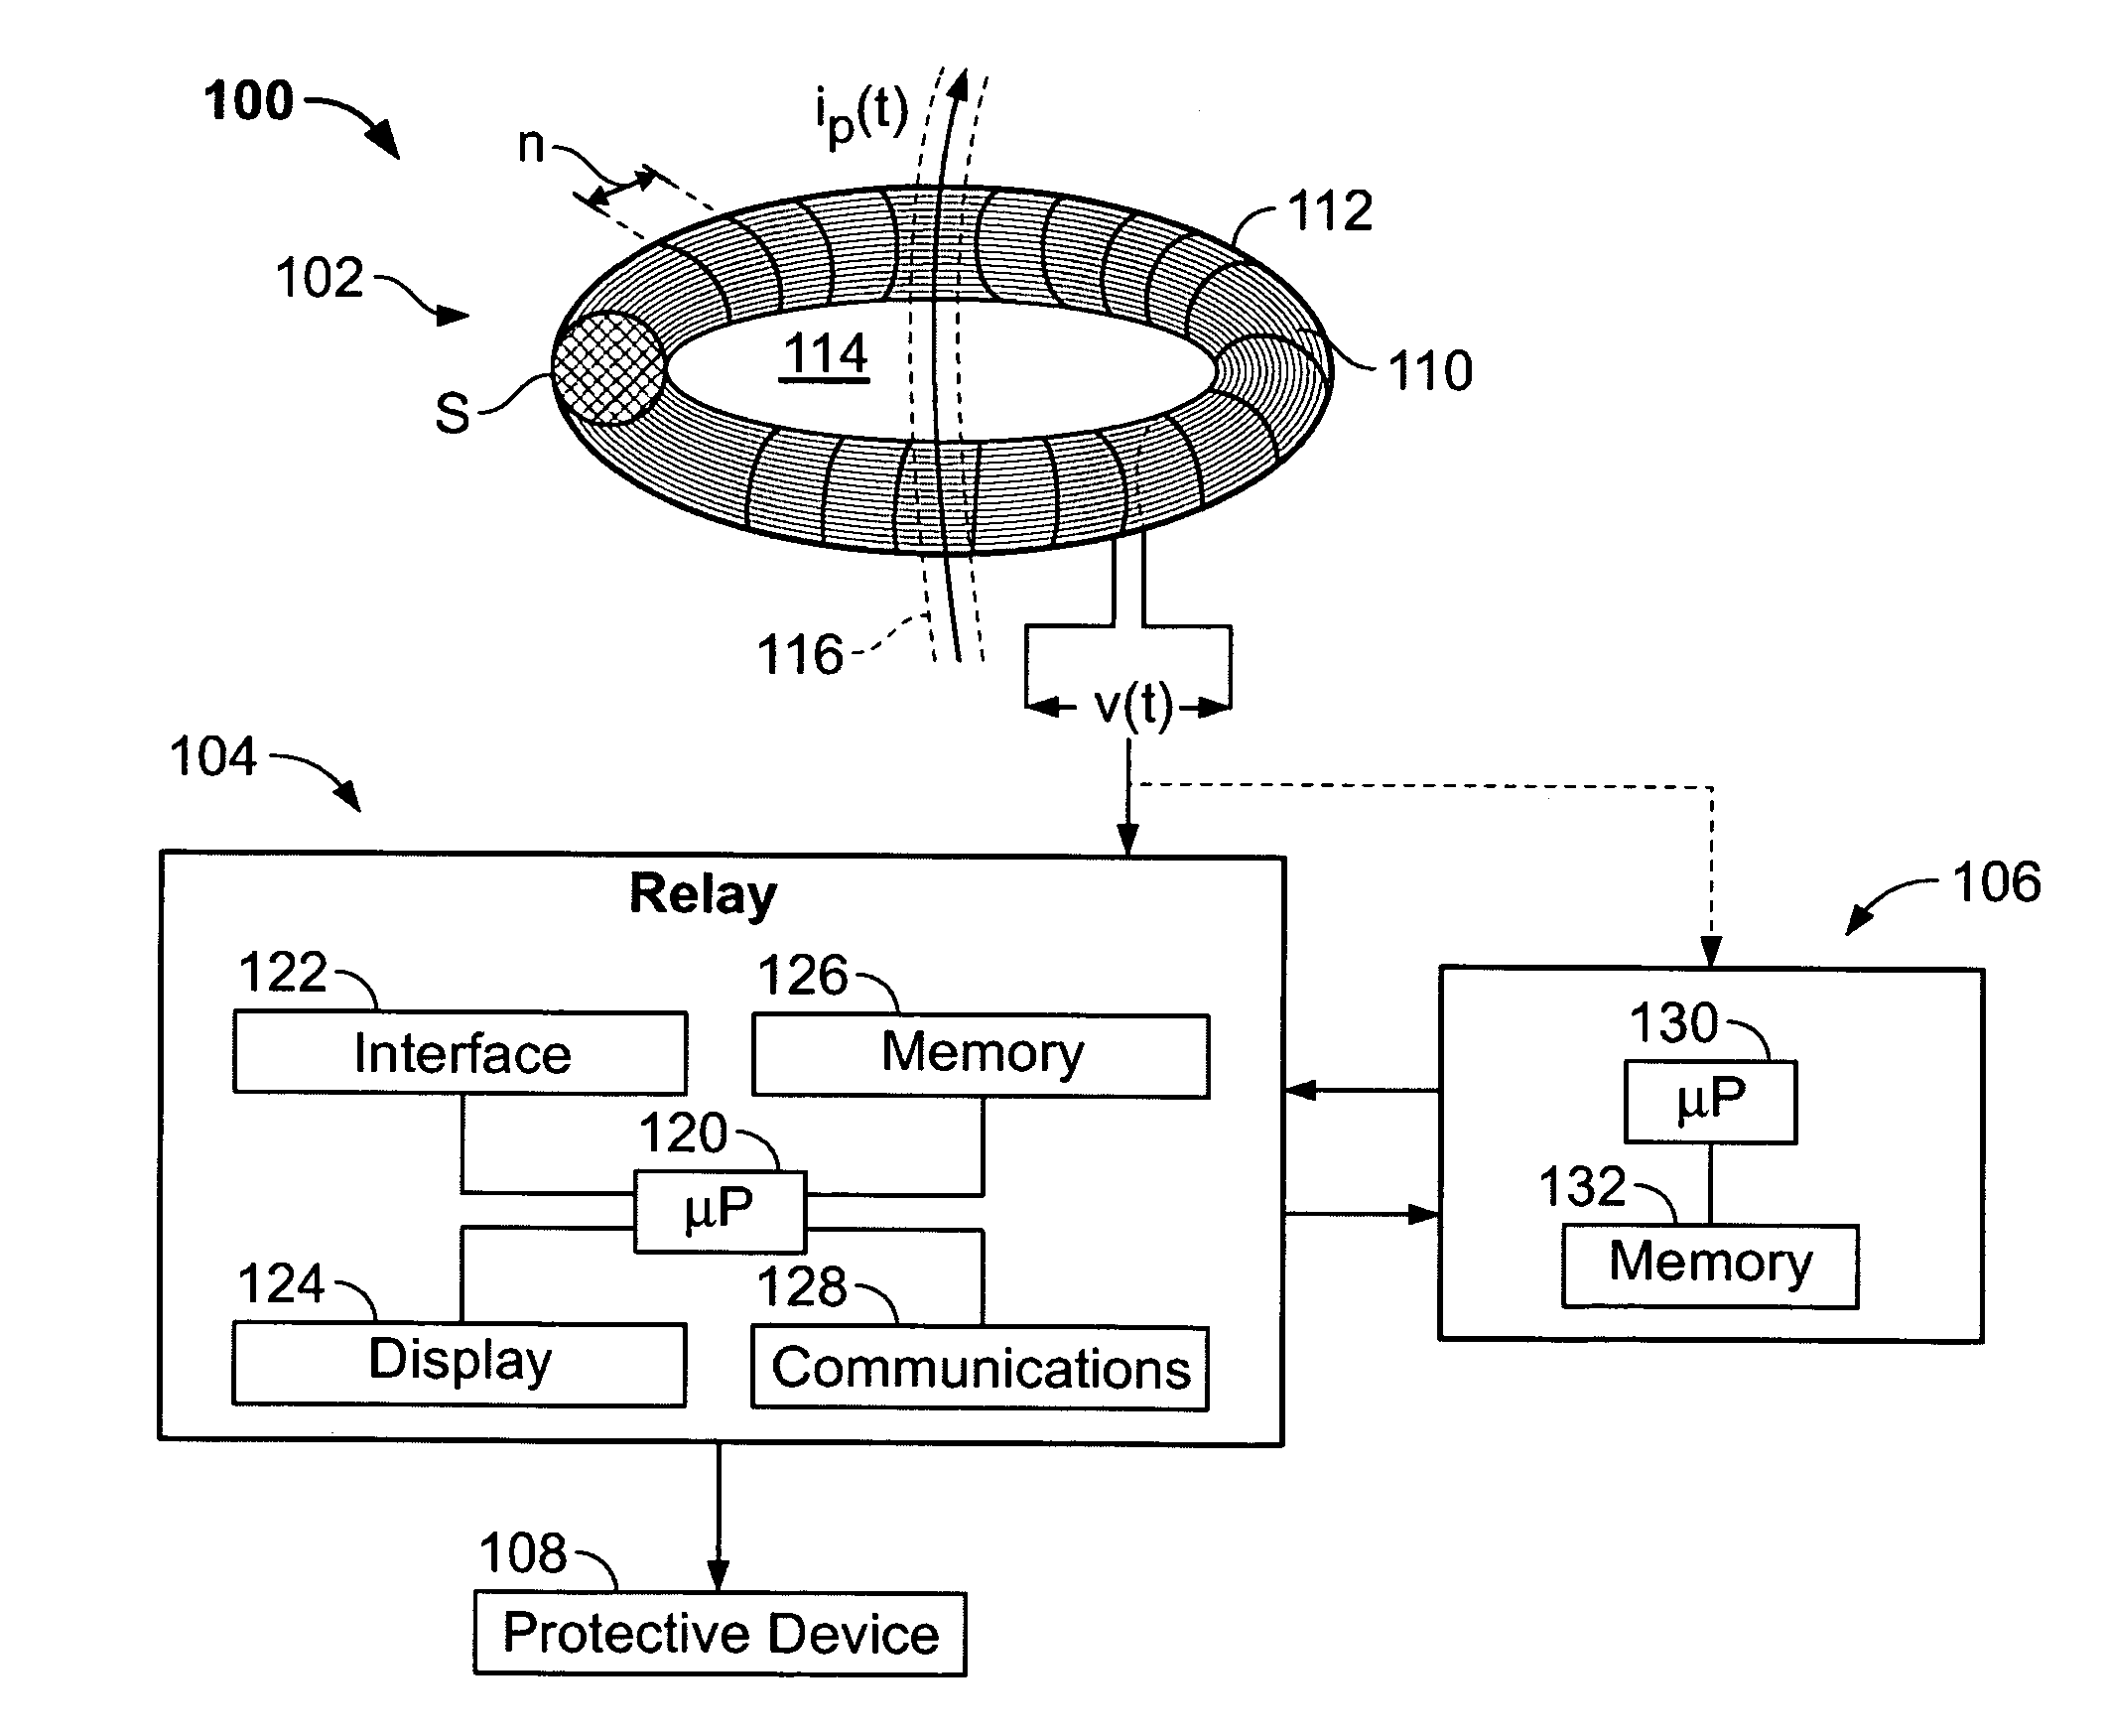 Protective relay device, system and methods for Rogowski coil sensors